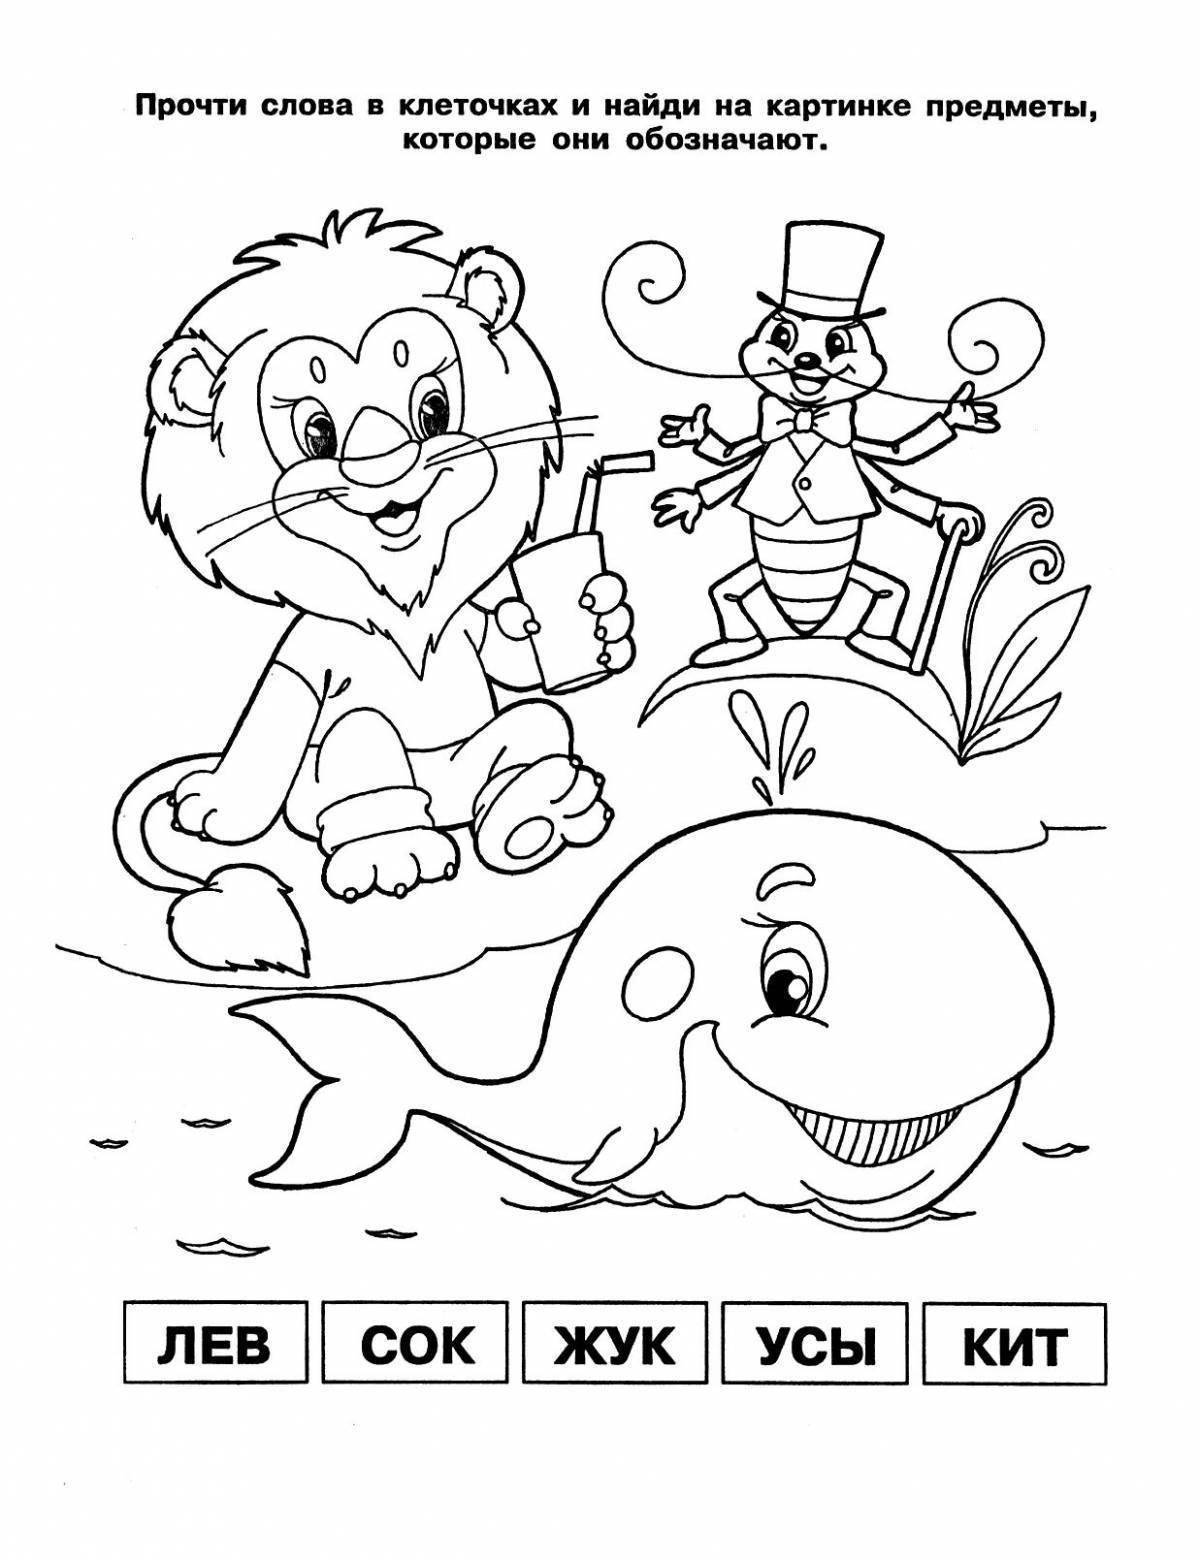 Crazy Alphabet coloring book for 5 year olds